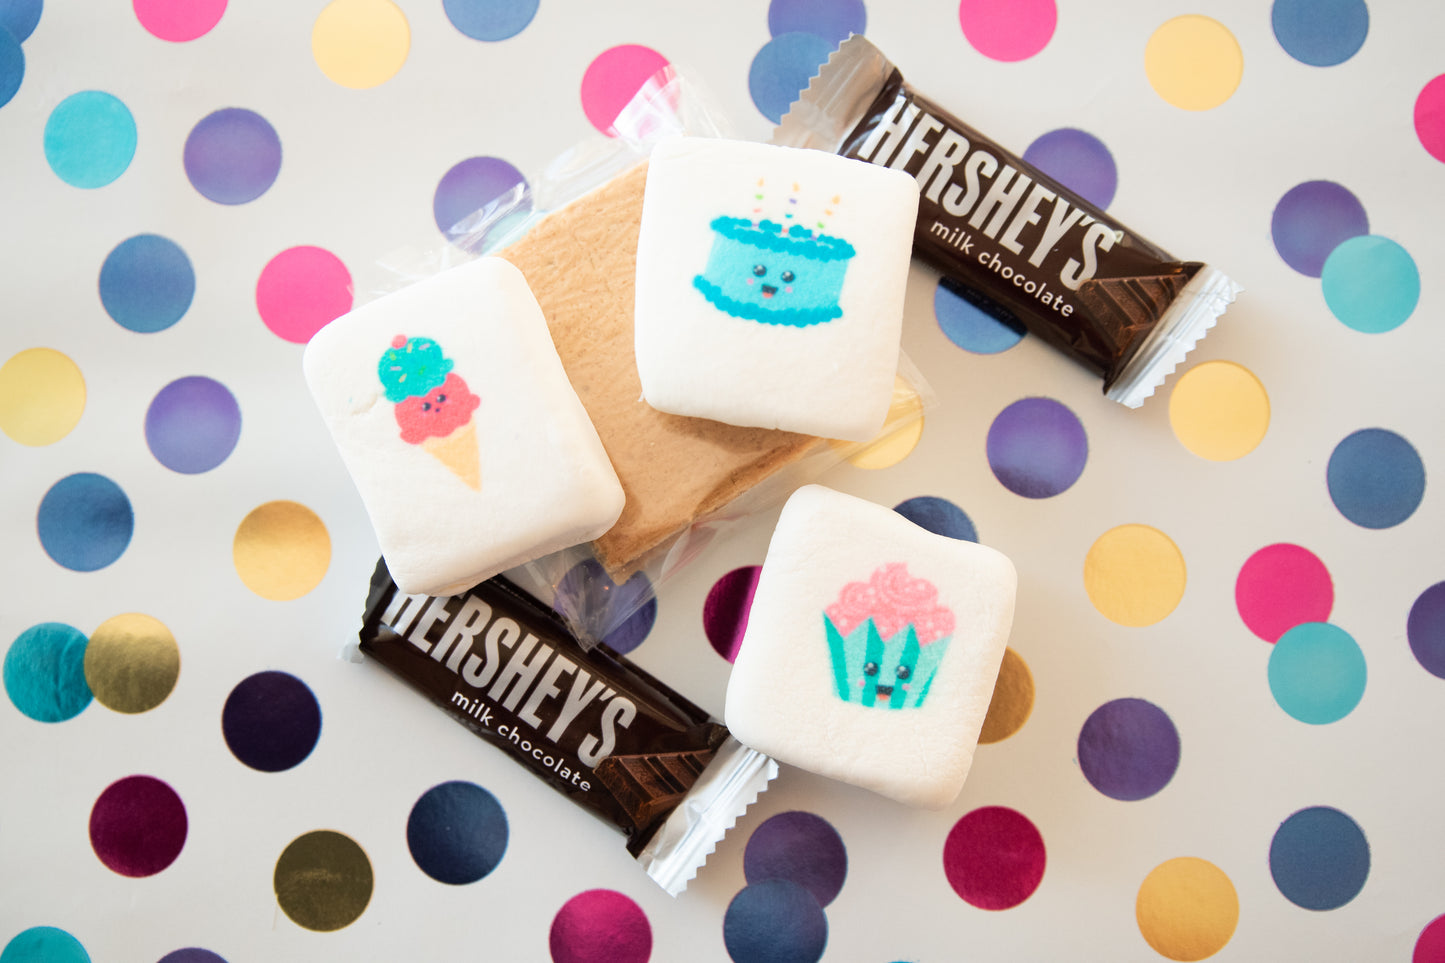 Custom Printed Marshmallow Box for Birthdays, Graduations, Baby Showers, and More!